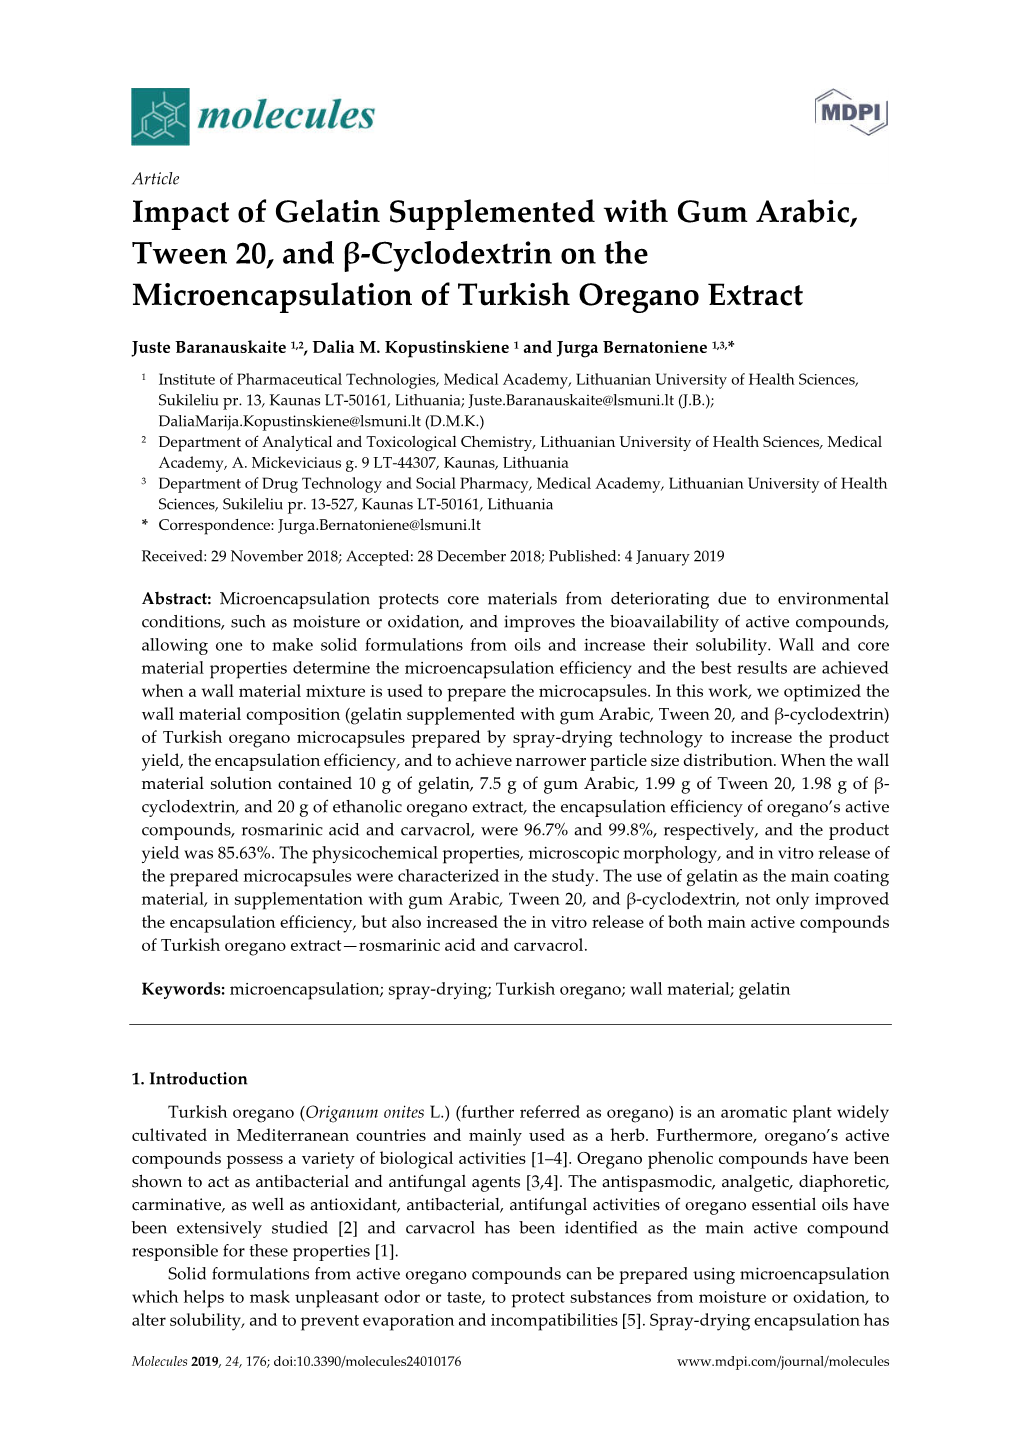 Impact of Gelatin Supplemented with Gum Arabic, Tween 20, and Β-Cyclodextrin on the Microencapsulation of Turkish Oregano Extract